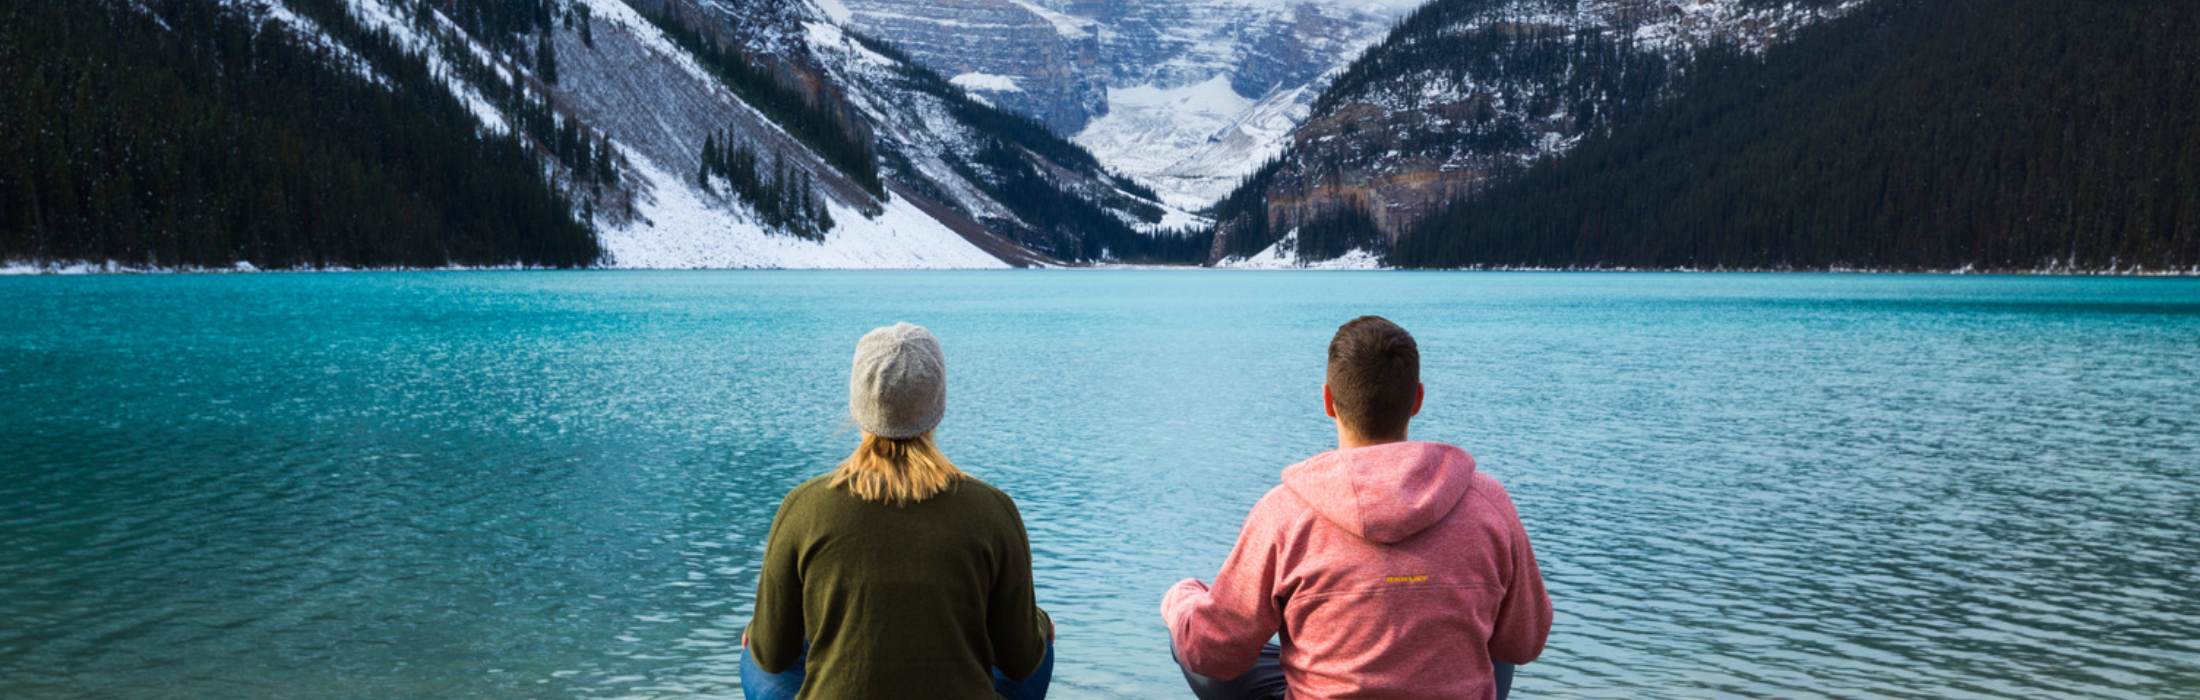 Lake Louise in Spring- Couples Travel - A couple on the shores of Lake Louise